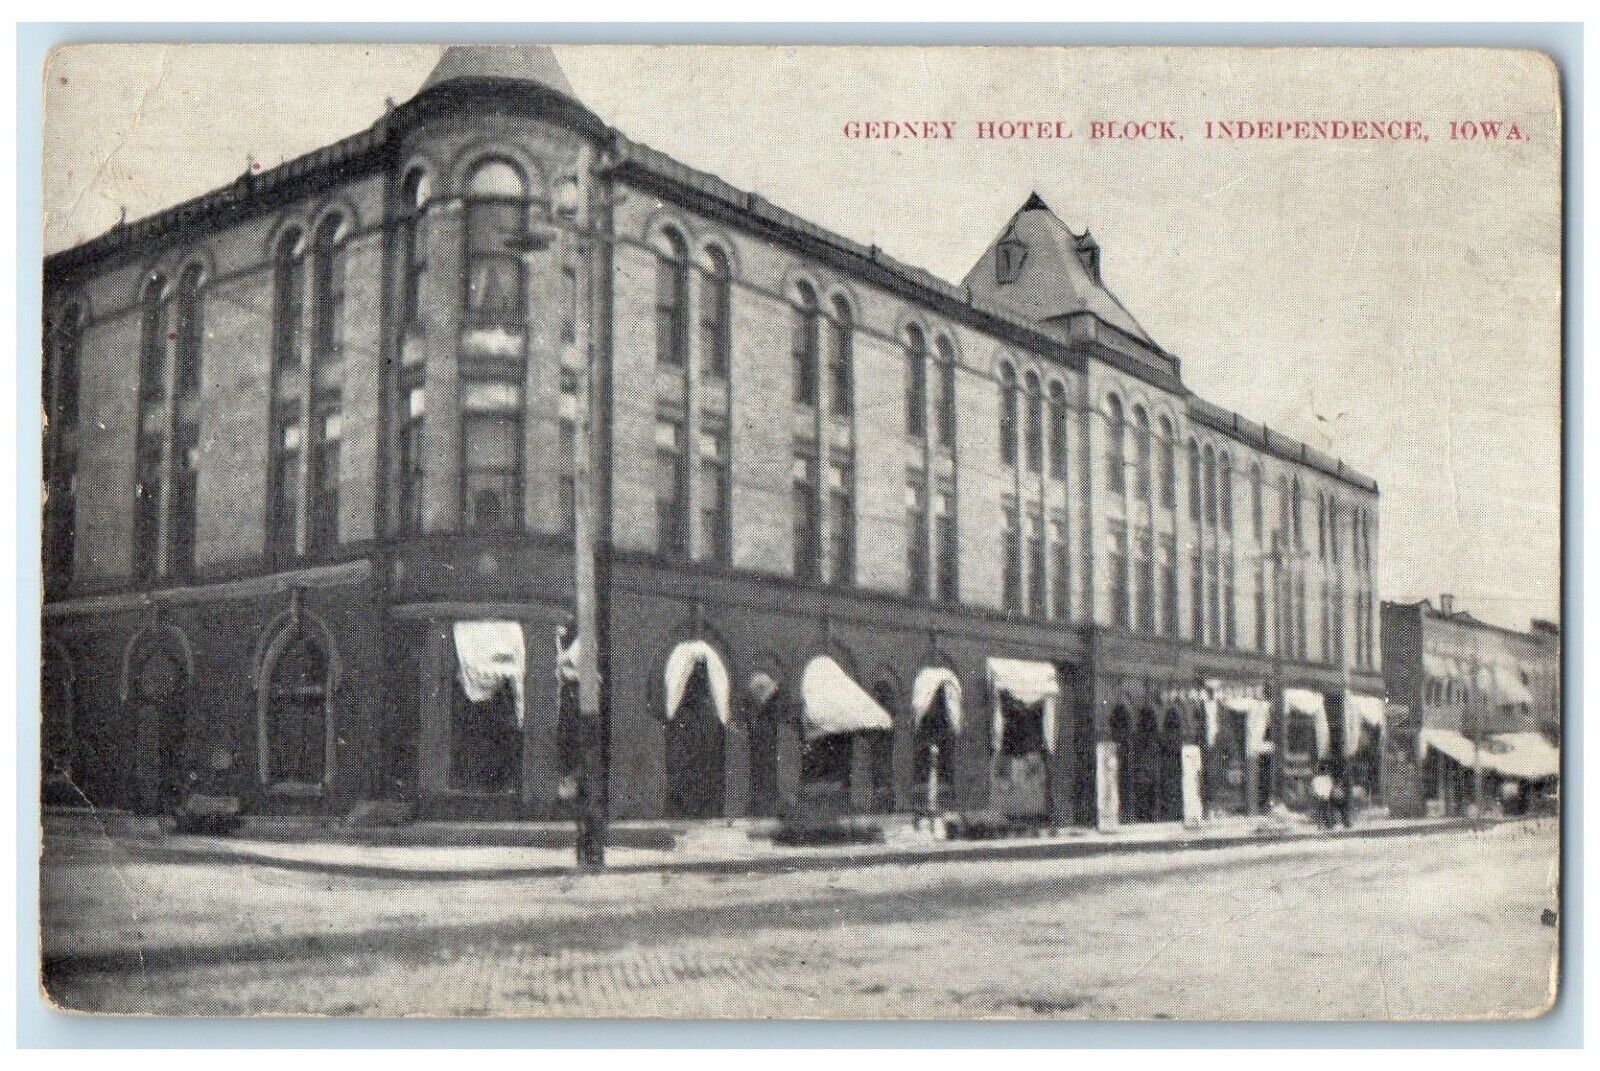 1909 Gedney Hotel Block Building Independence Iowa IA Posted Antique Postcard